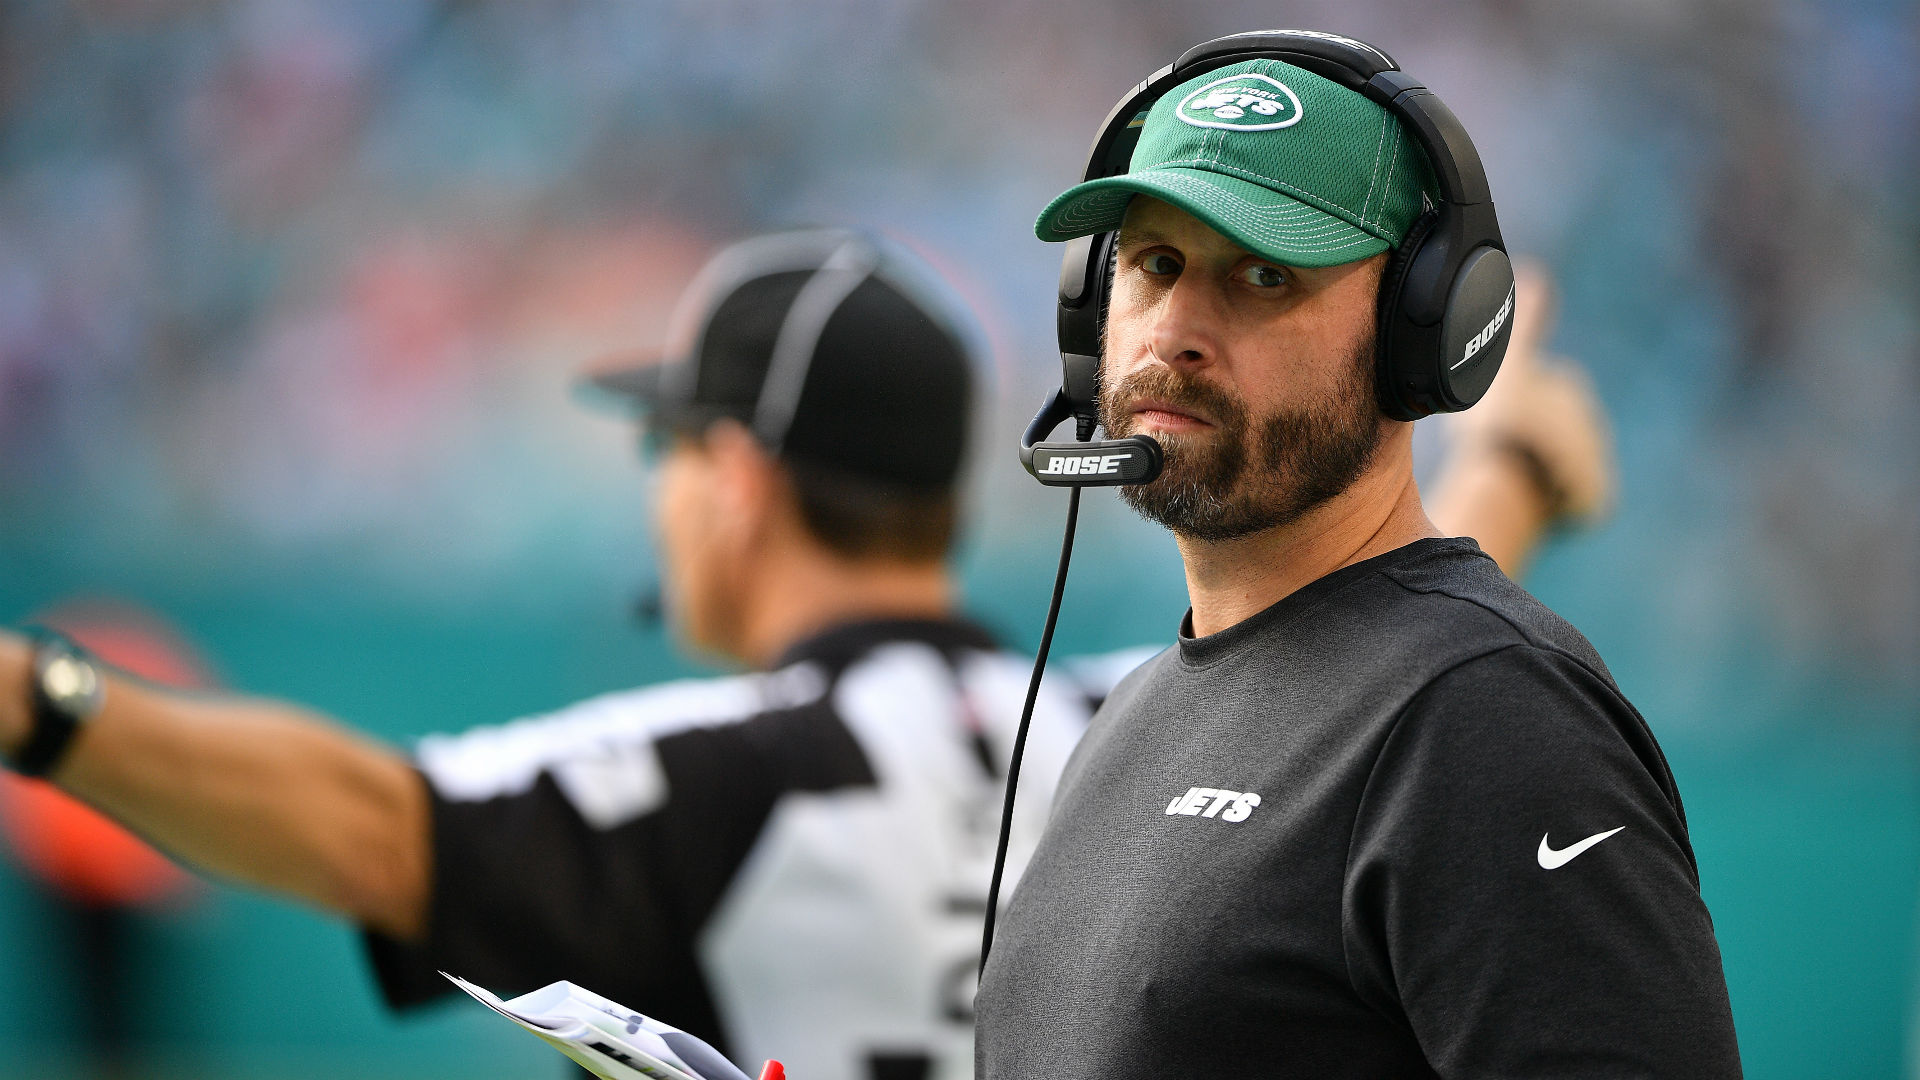 https://images.daznservices.com/di/library/sporting_news/e2/af/adam-gase-jets-ftr-111319_16gcd27myf9bk1538c98wa806v.jpg?t=1795039454&w=%7Bwidth%7D&quality=80